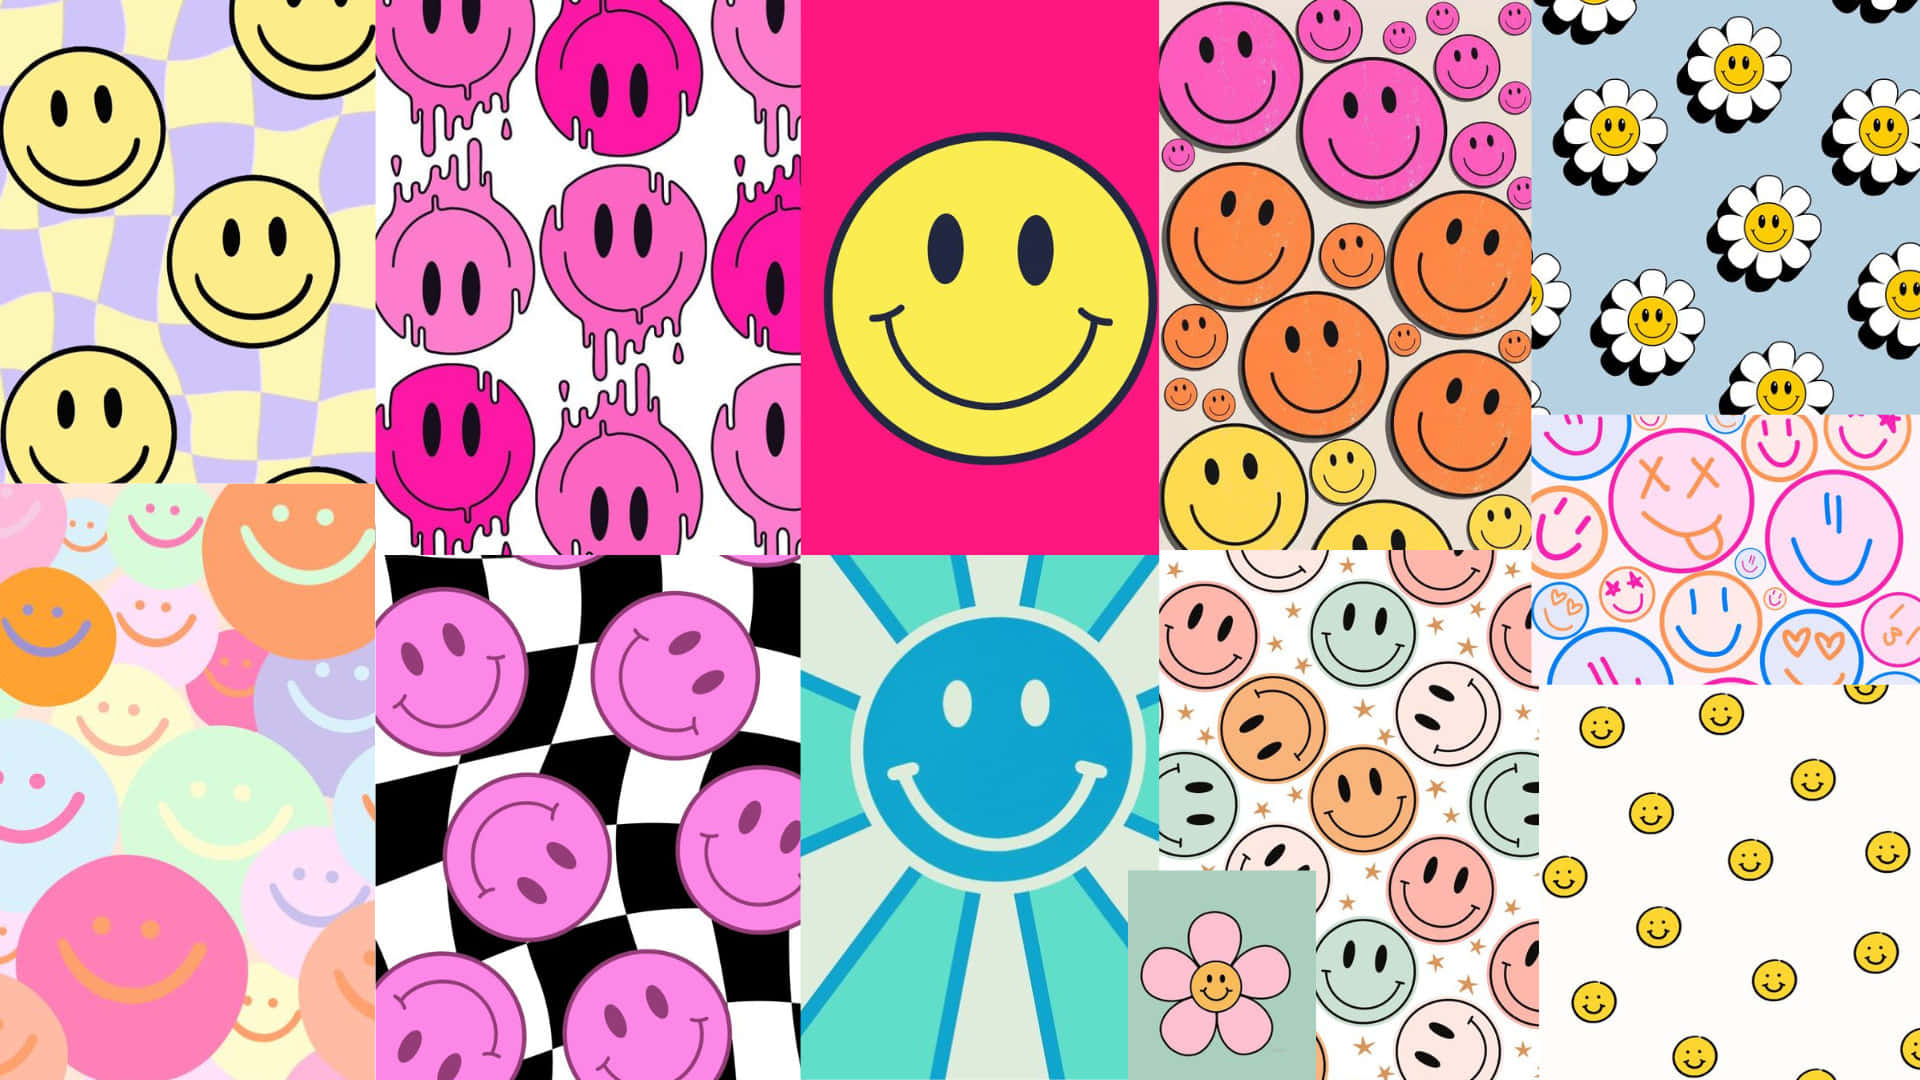 Colorful_ Smiley_ Face_ Collage.jpg Wallpaper